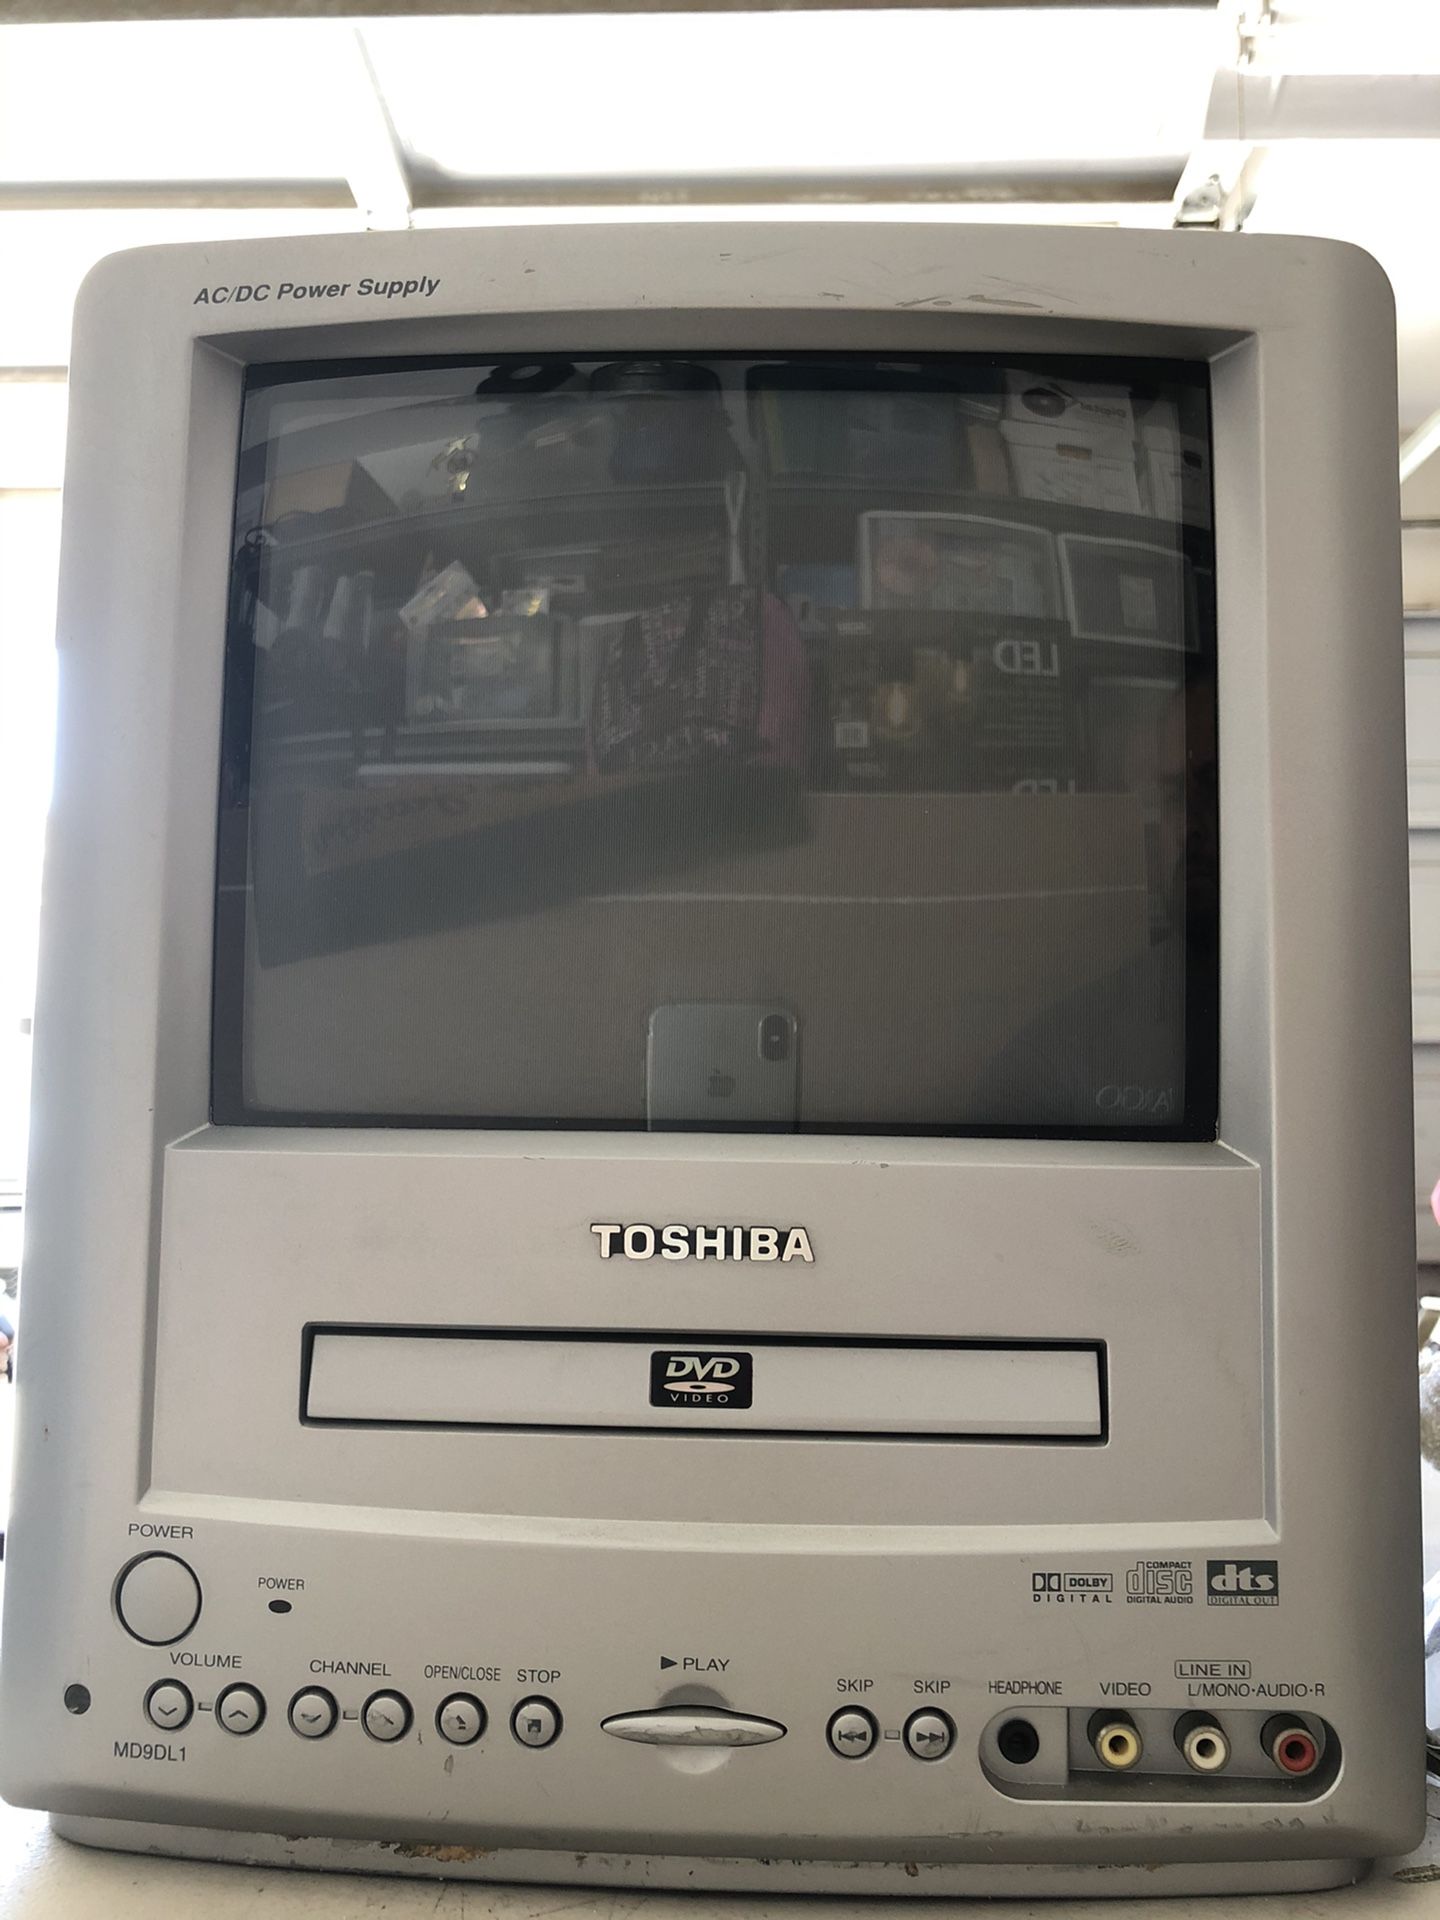 Toshiba TV with DVD player Retro game player